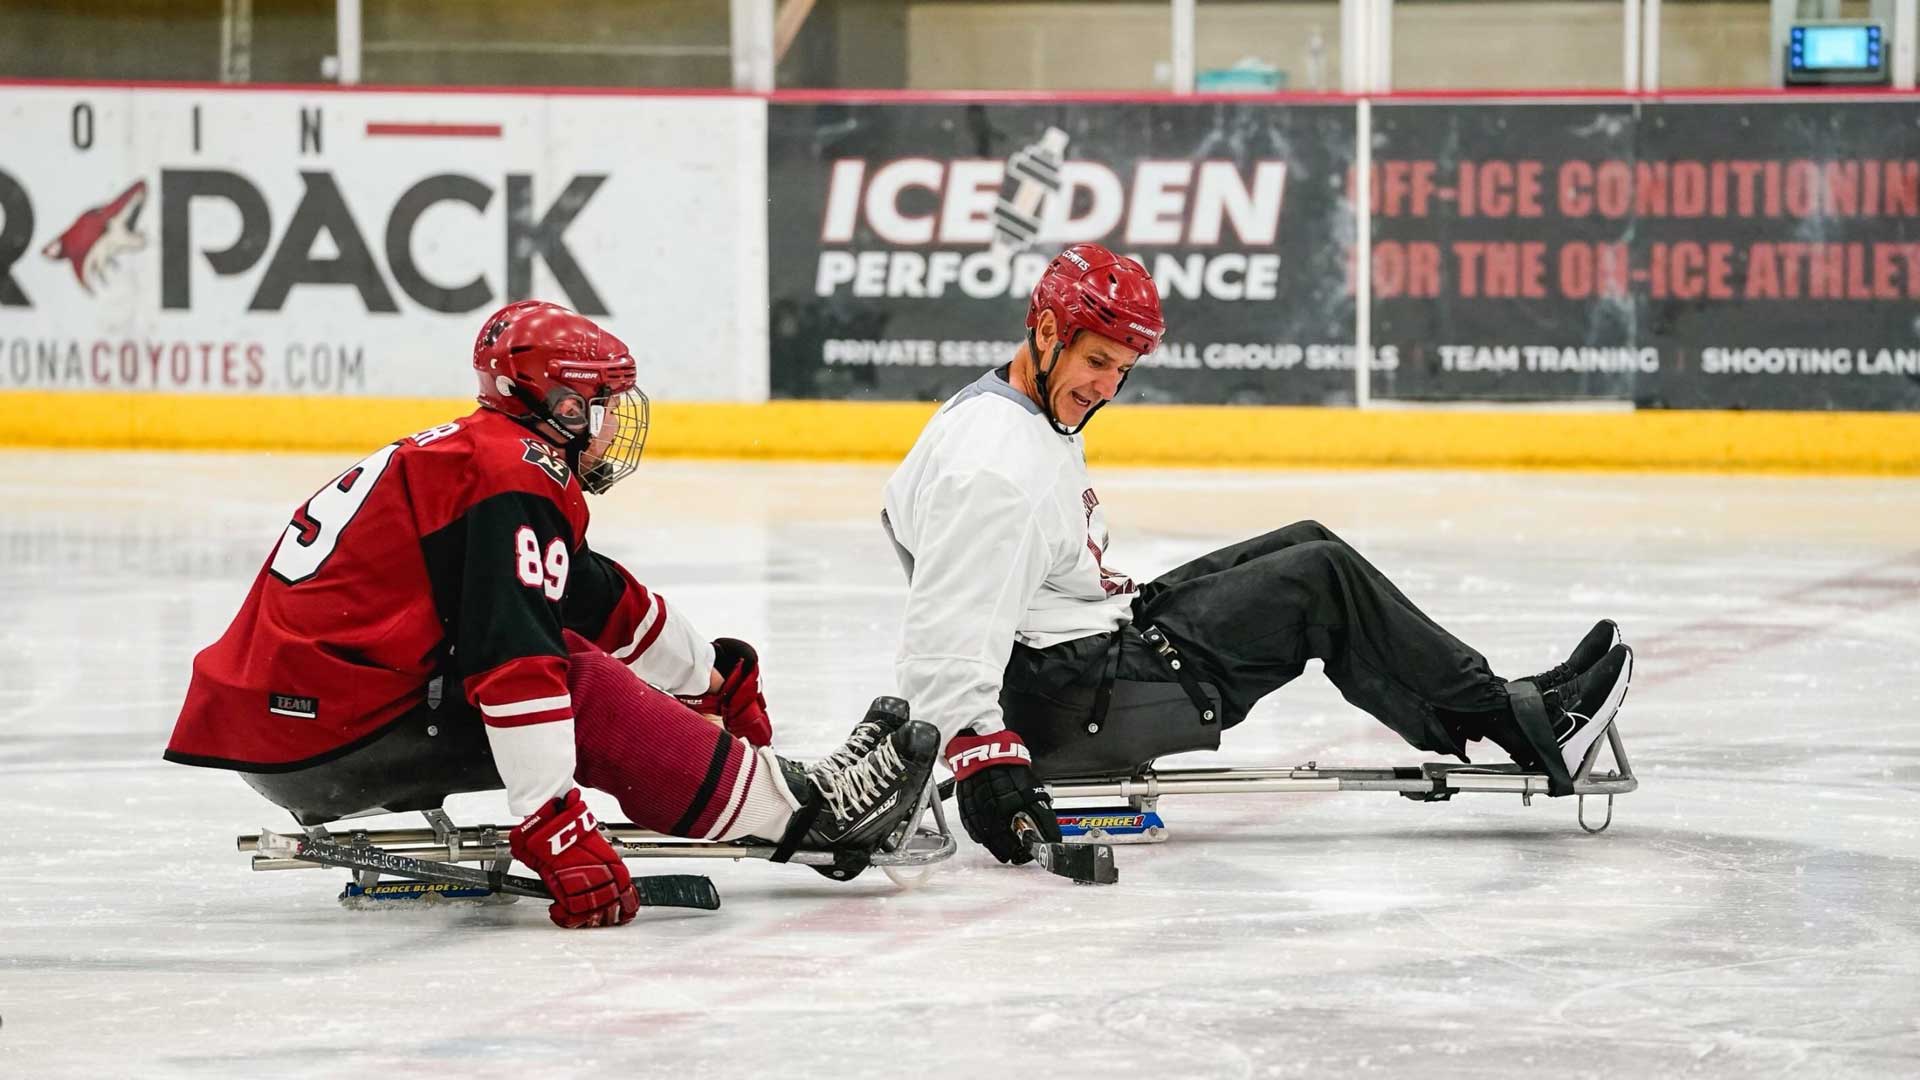 Coyotes Sled Hockey players with various disabilities, including amputees and those with spinal cord injuries, highlight the team’s mission of inclusivity. 